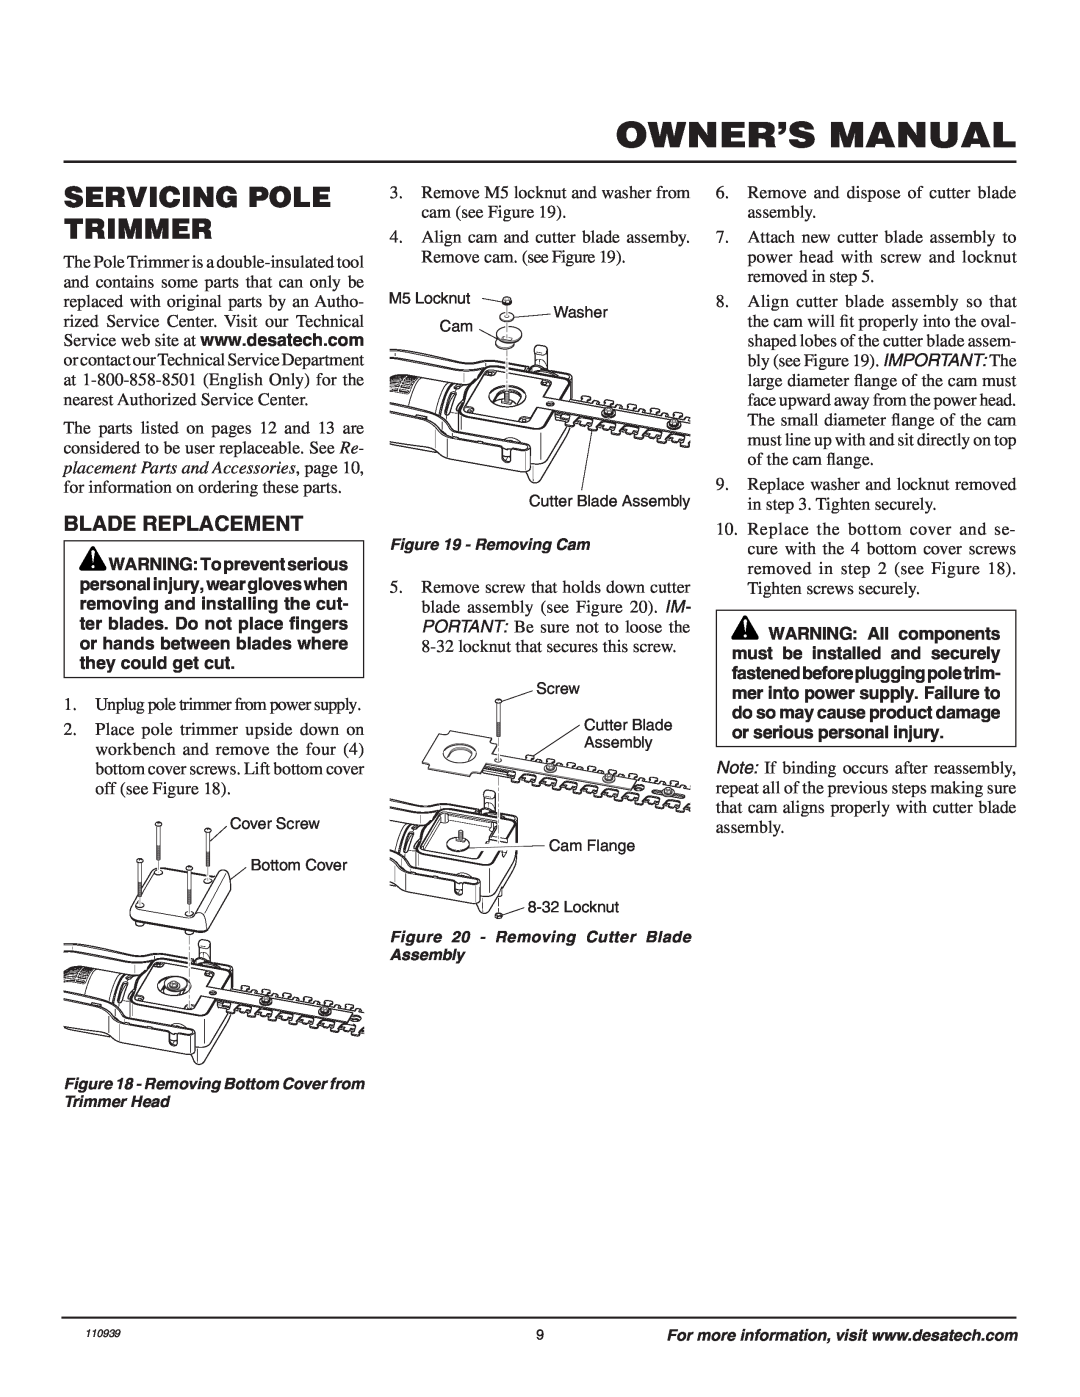 Desa 110946-01A owner manual Servicing Pole Trimmer, Blade Replacement, Owner’S Manual 